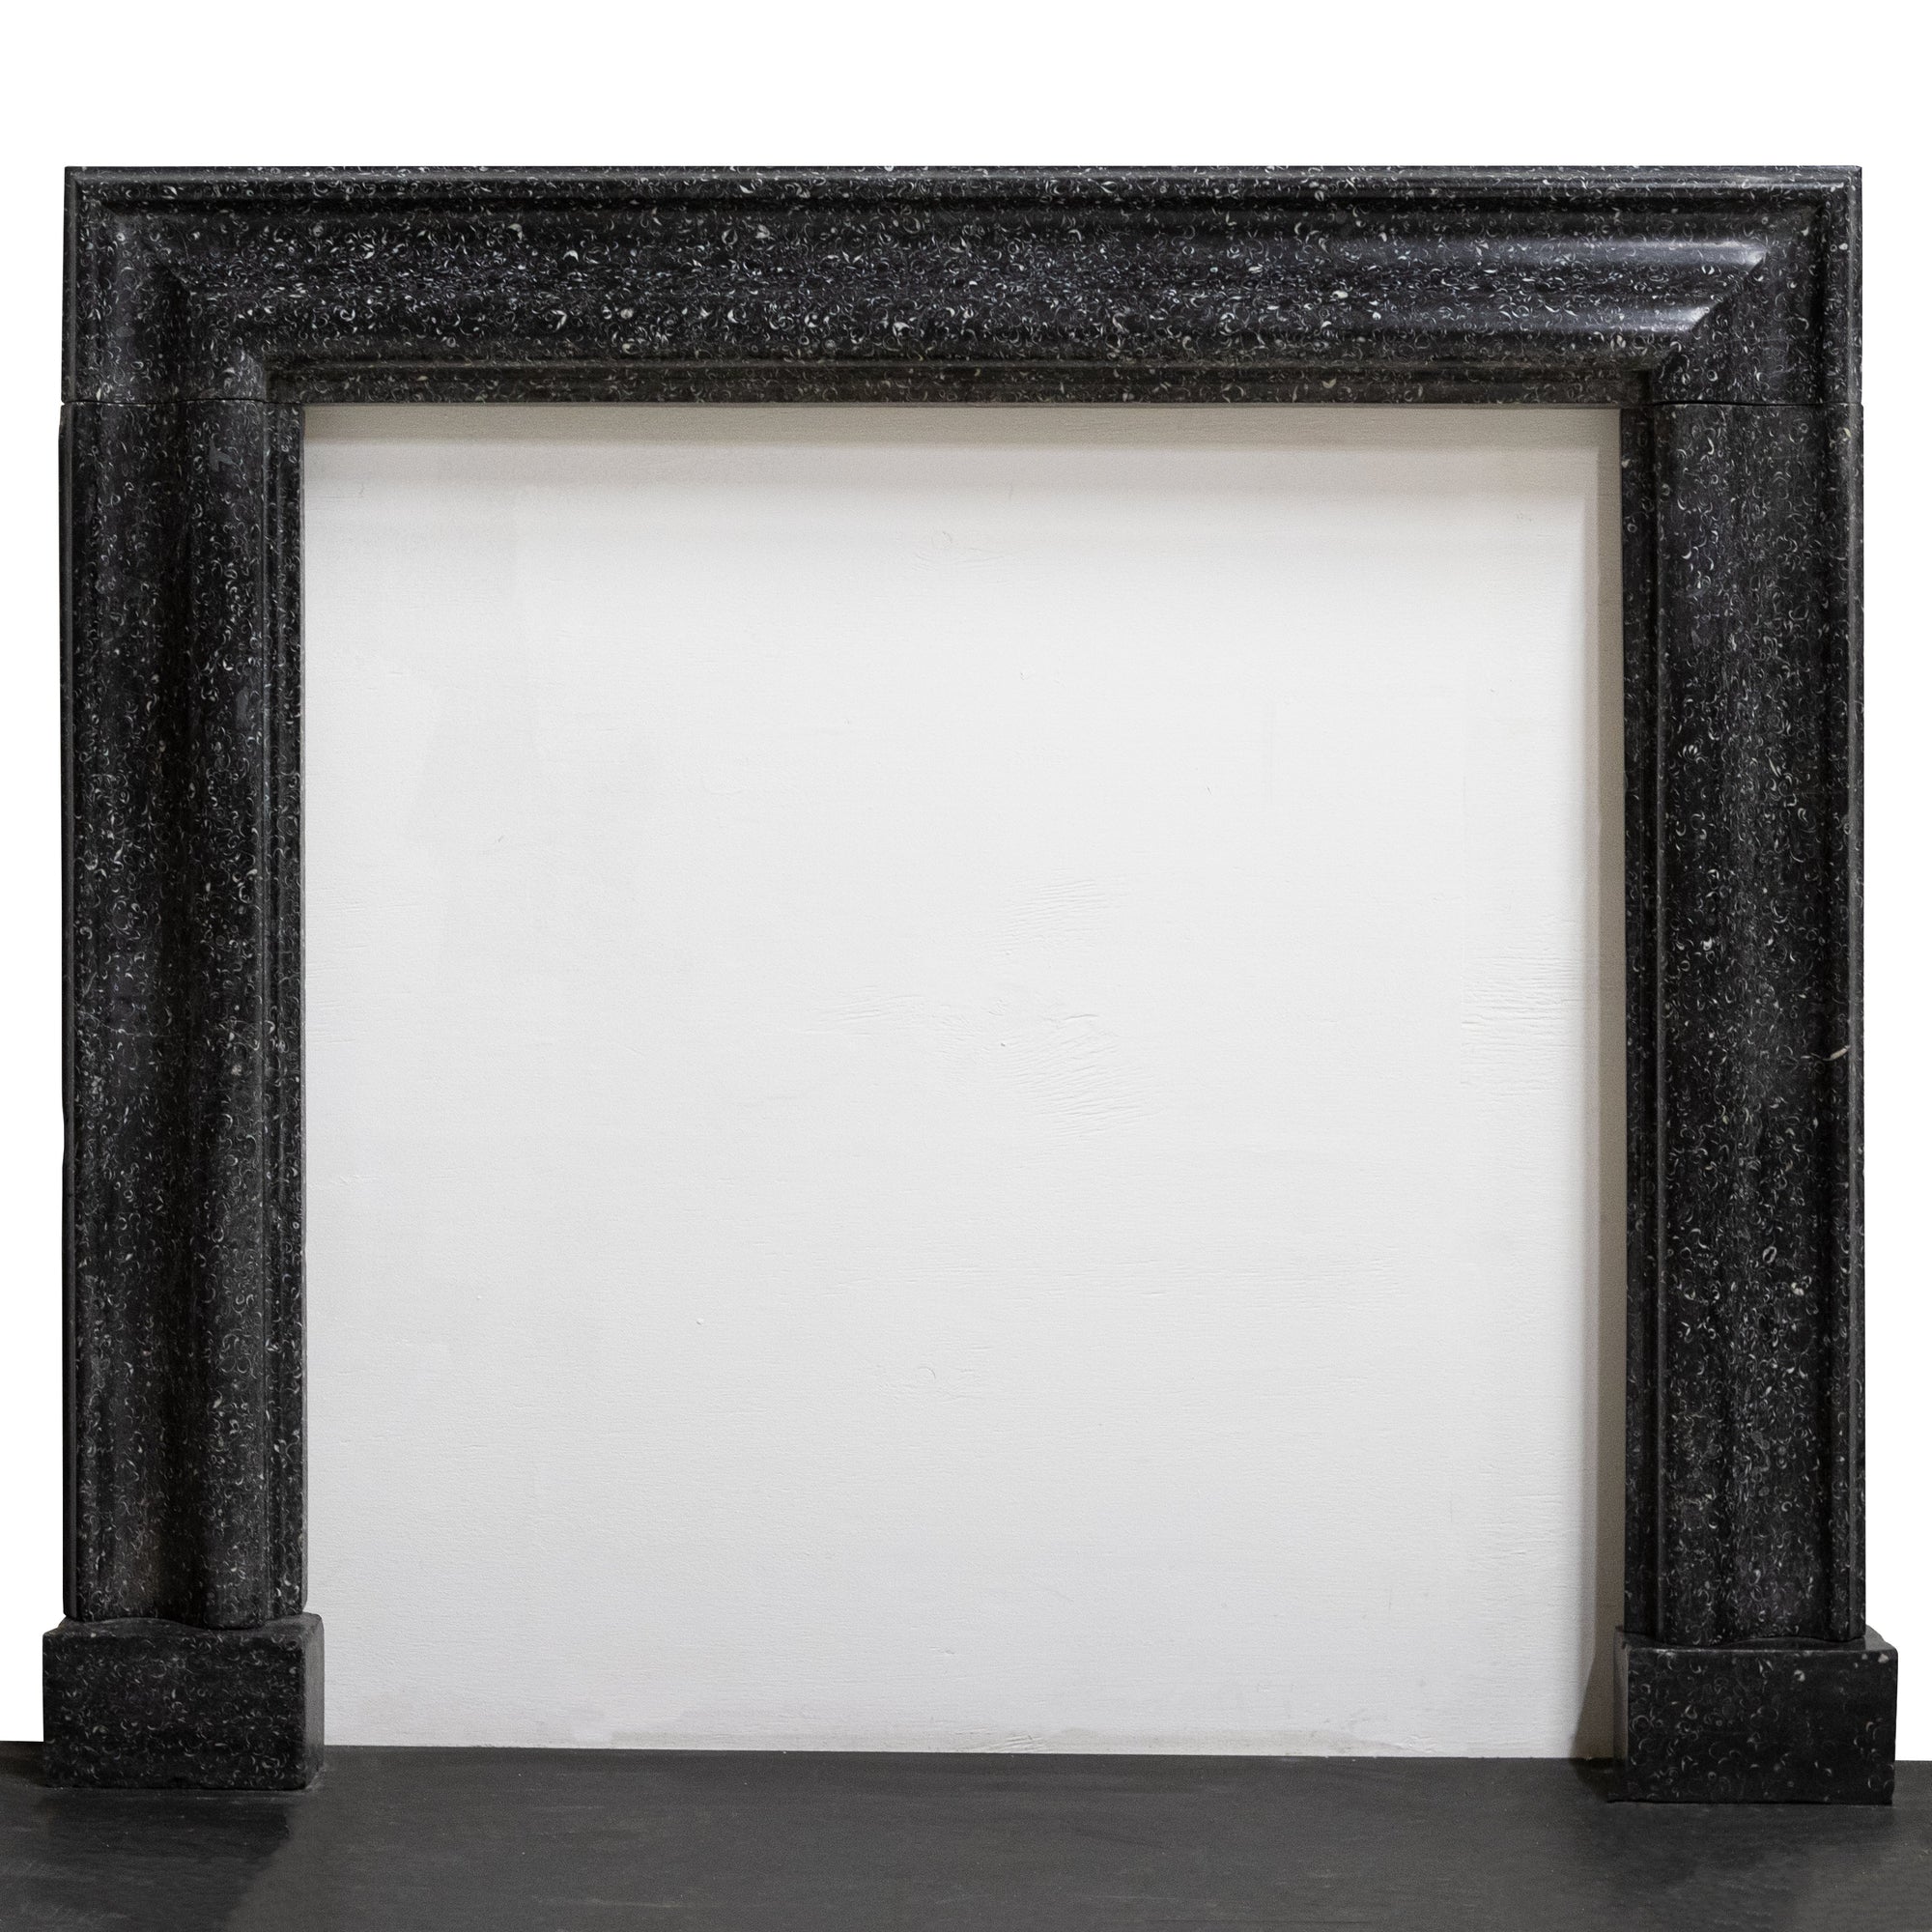 Splendid Antique 18th Century Kilkenny Marble Bolection Fireplace Surround | The Architectural Forum